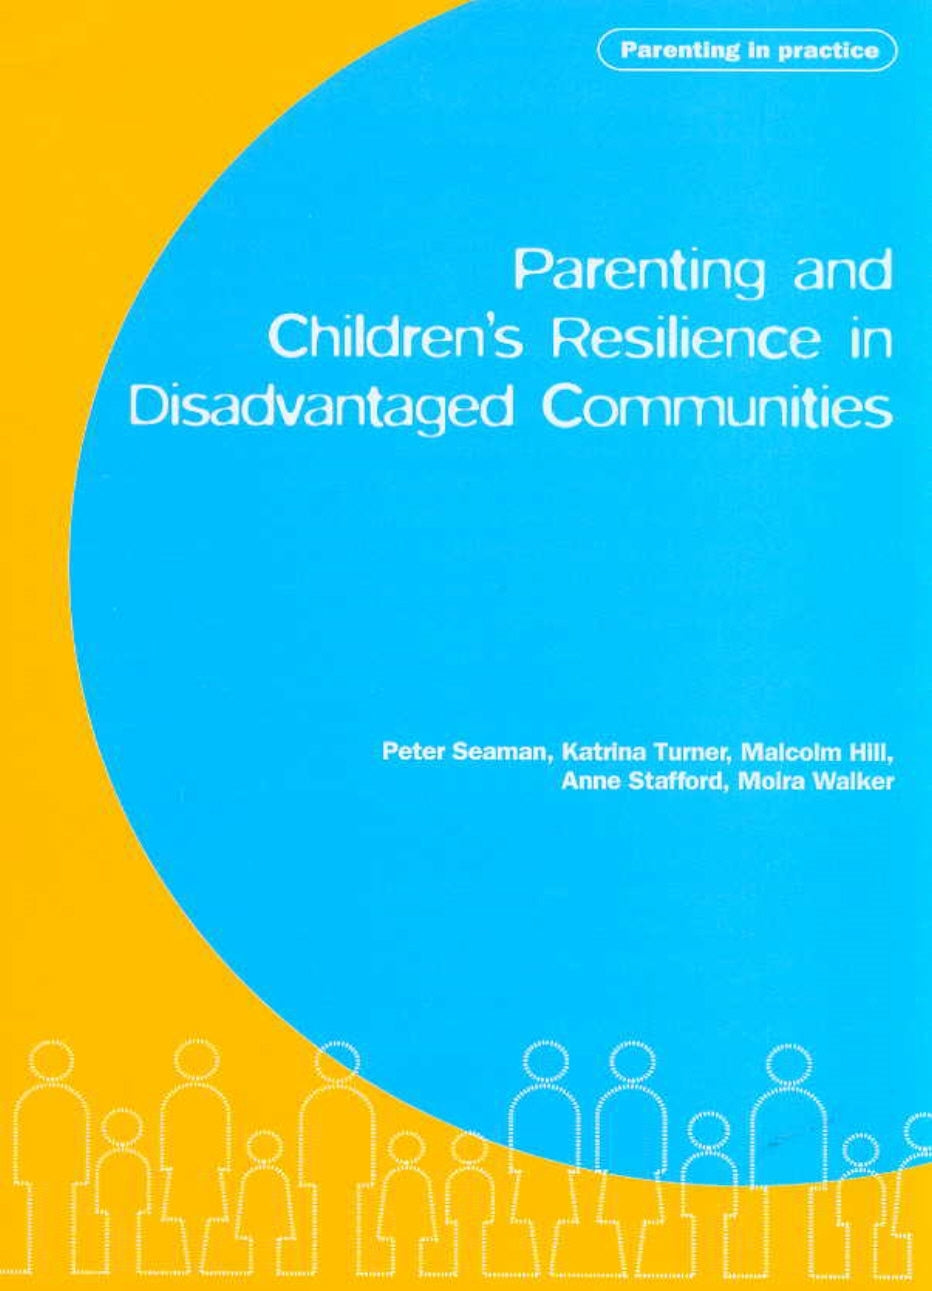 Parenting and Children's Resilience in Disadvantaged Communities by Katrina Turner, Pete Seaman